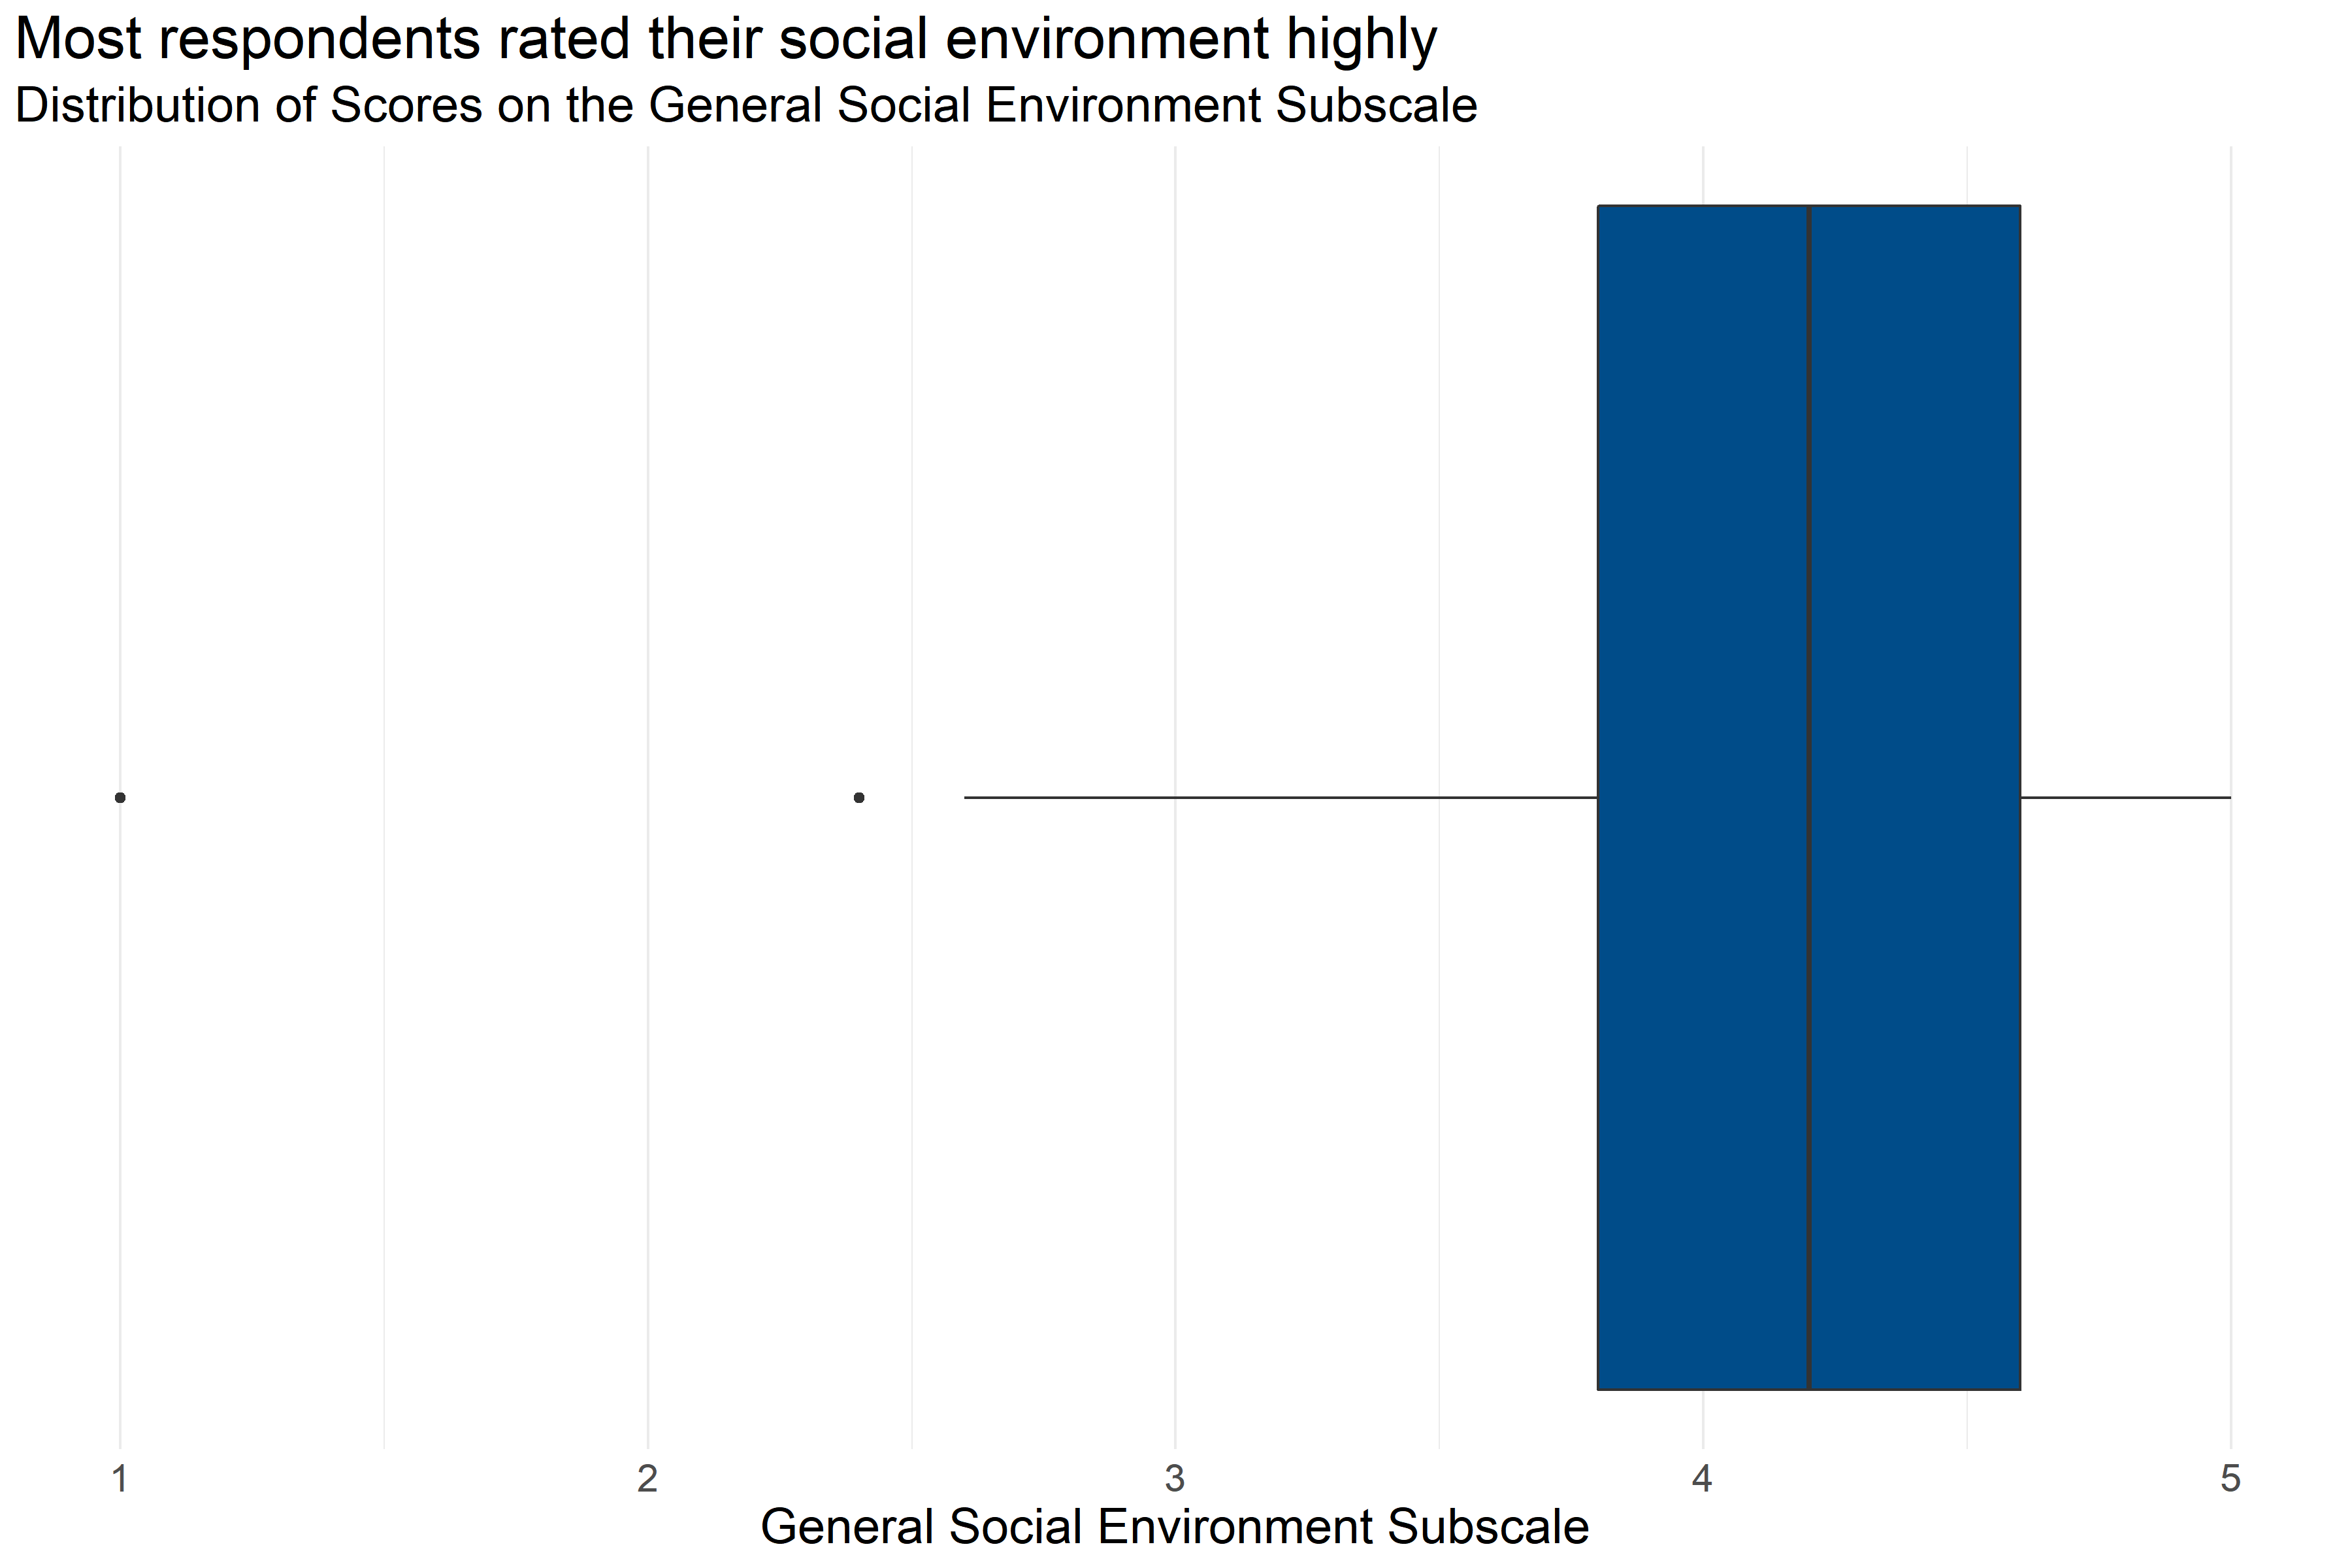 Boxplot of score distributions for the General Social Environment Subscale